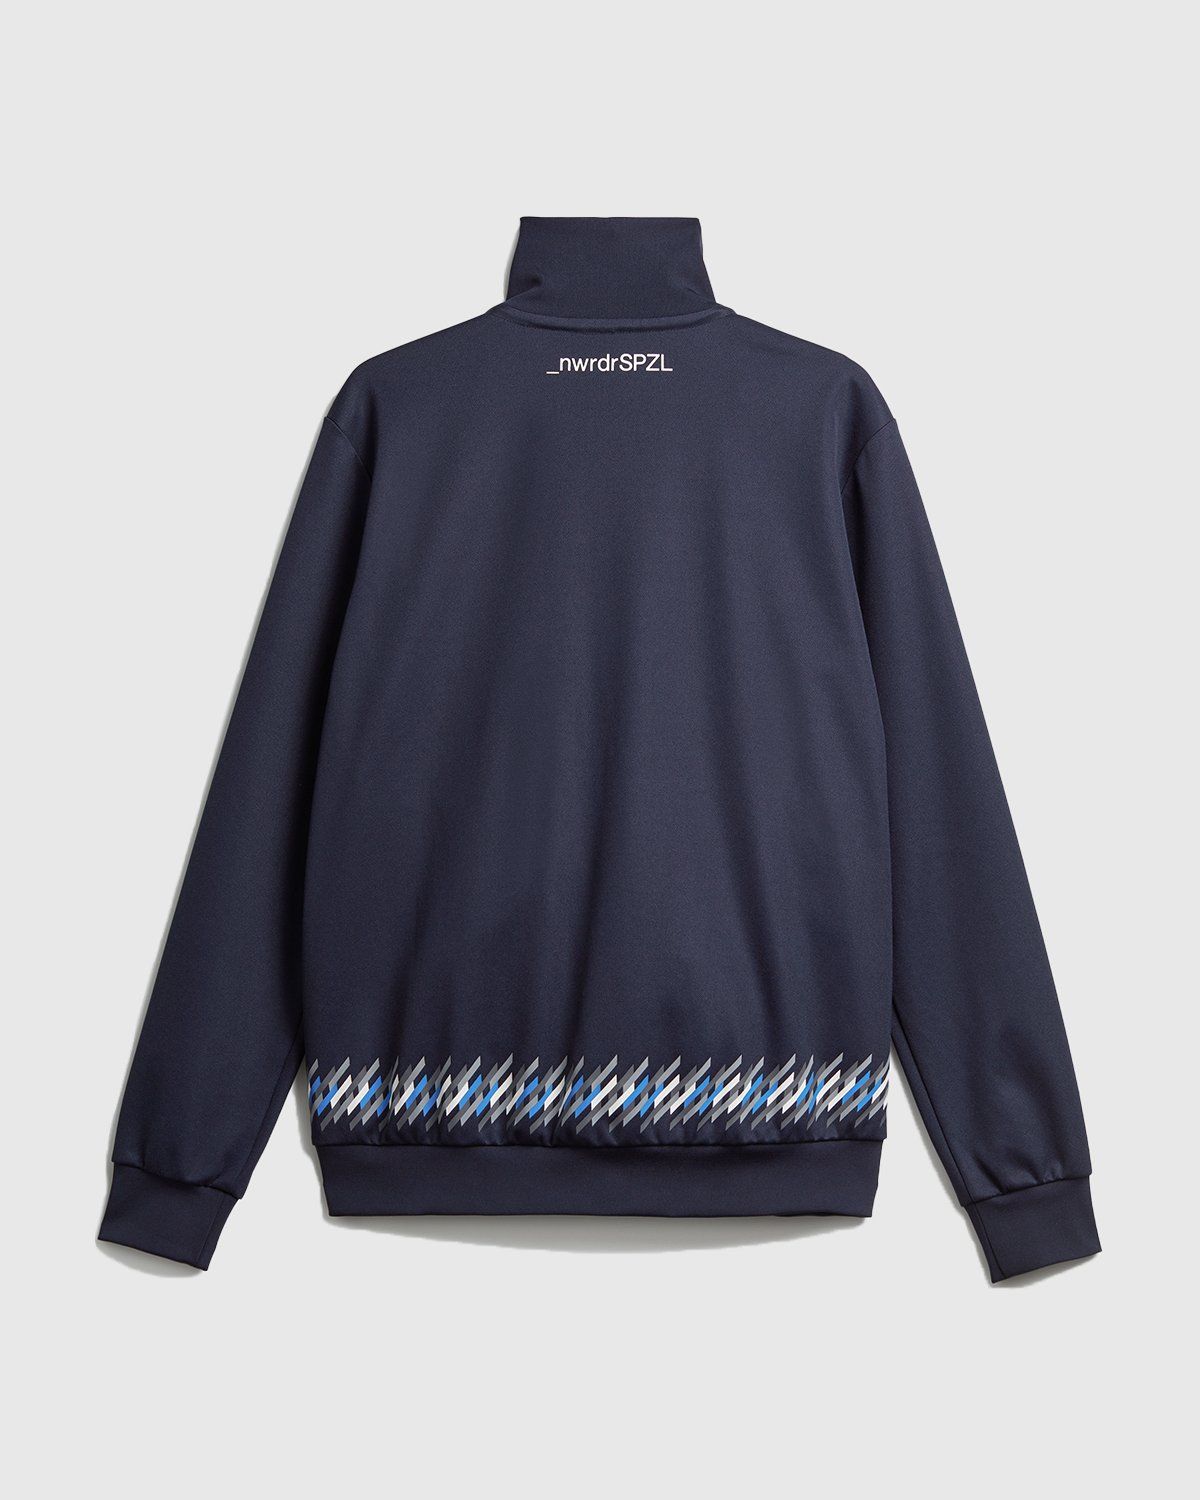 Adidas – Track Top Spezial x New Order Navy - Sweats - Blue - Image 2